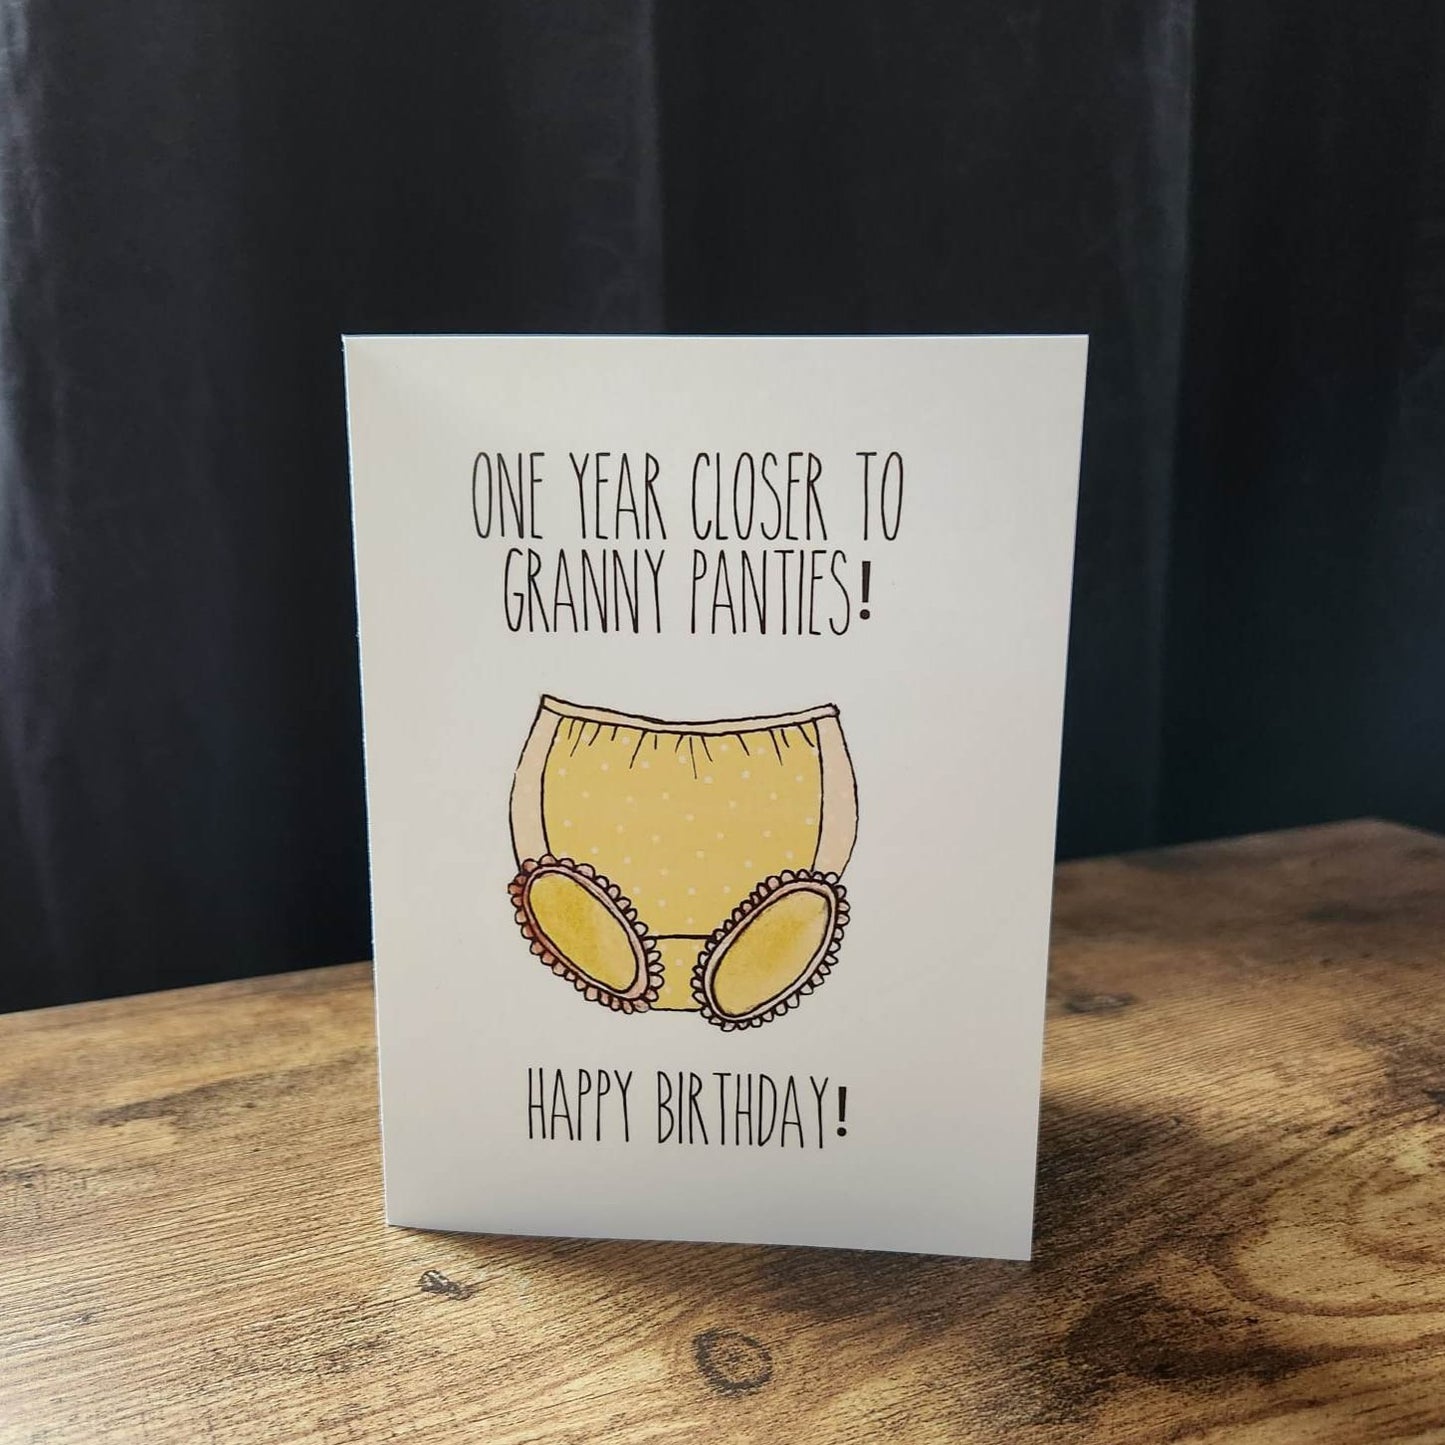 One year closer to granny panties, Funny birthday card, Birthday card for best friend, Old lady card, Birthday Humor, Old age joke card